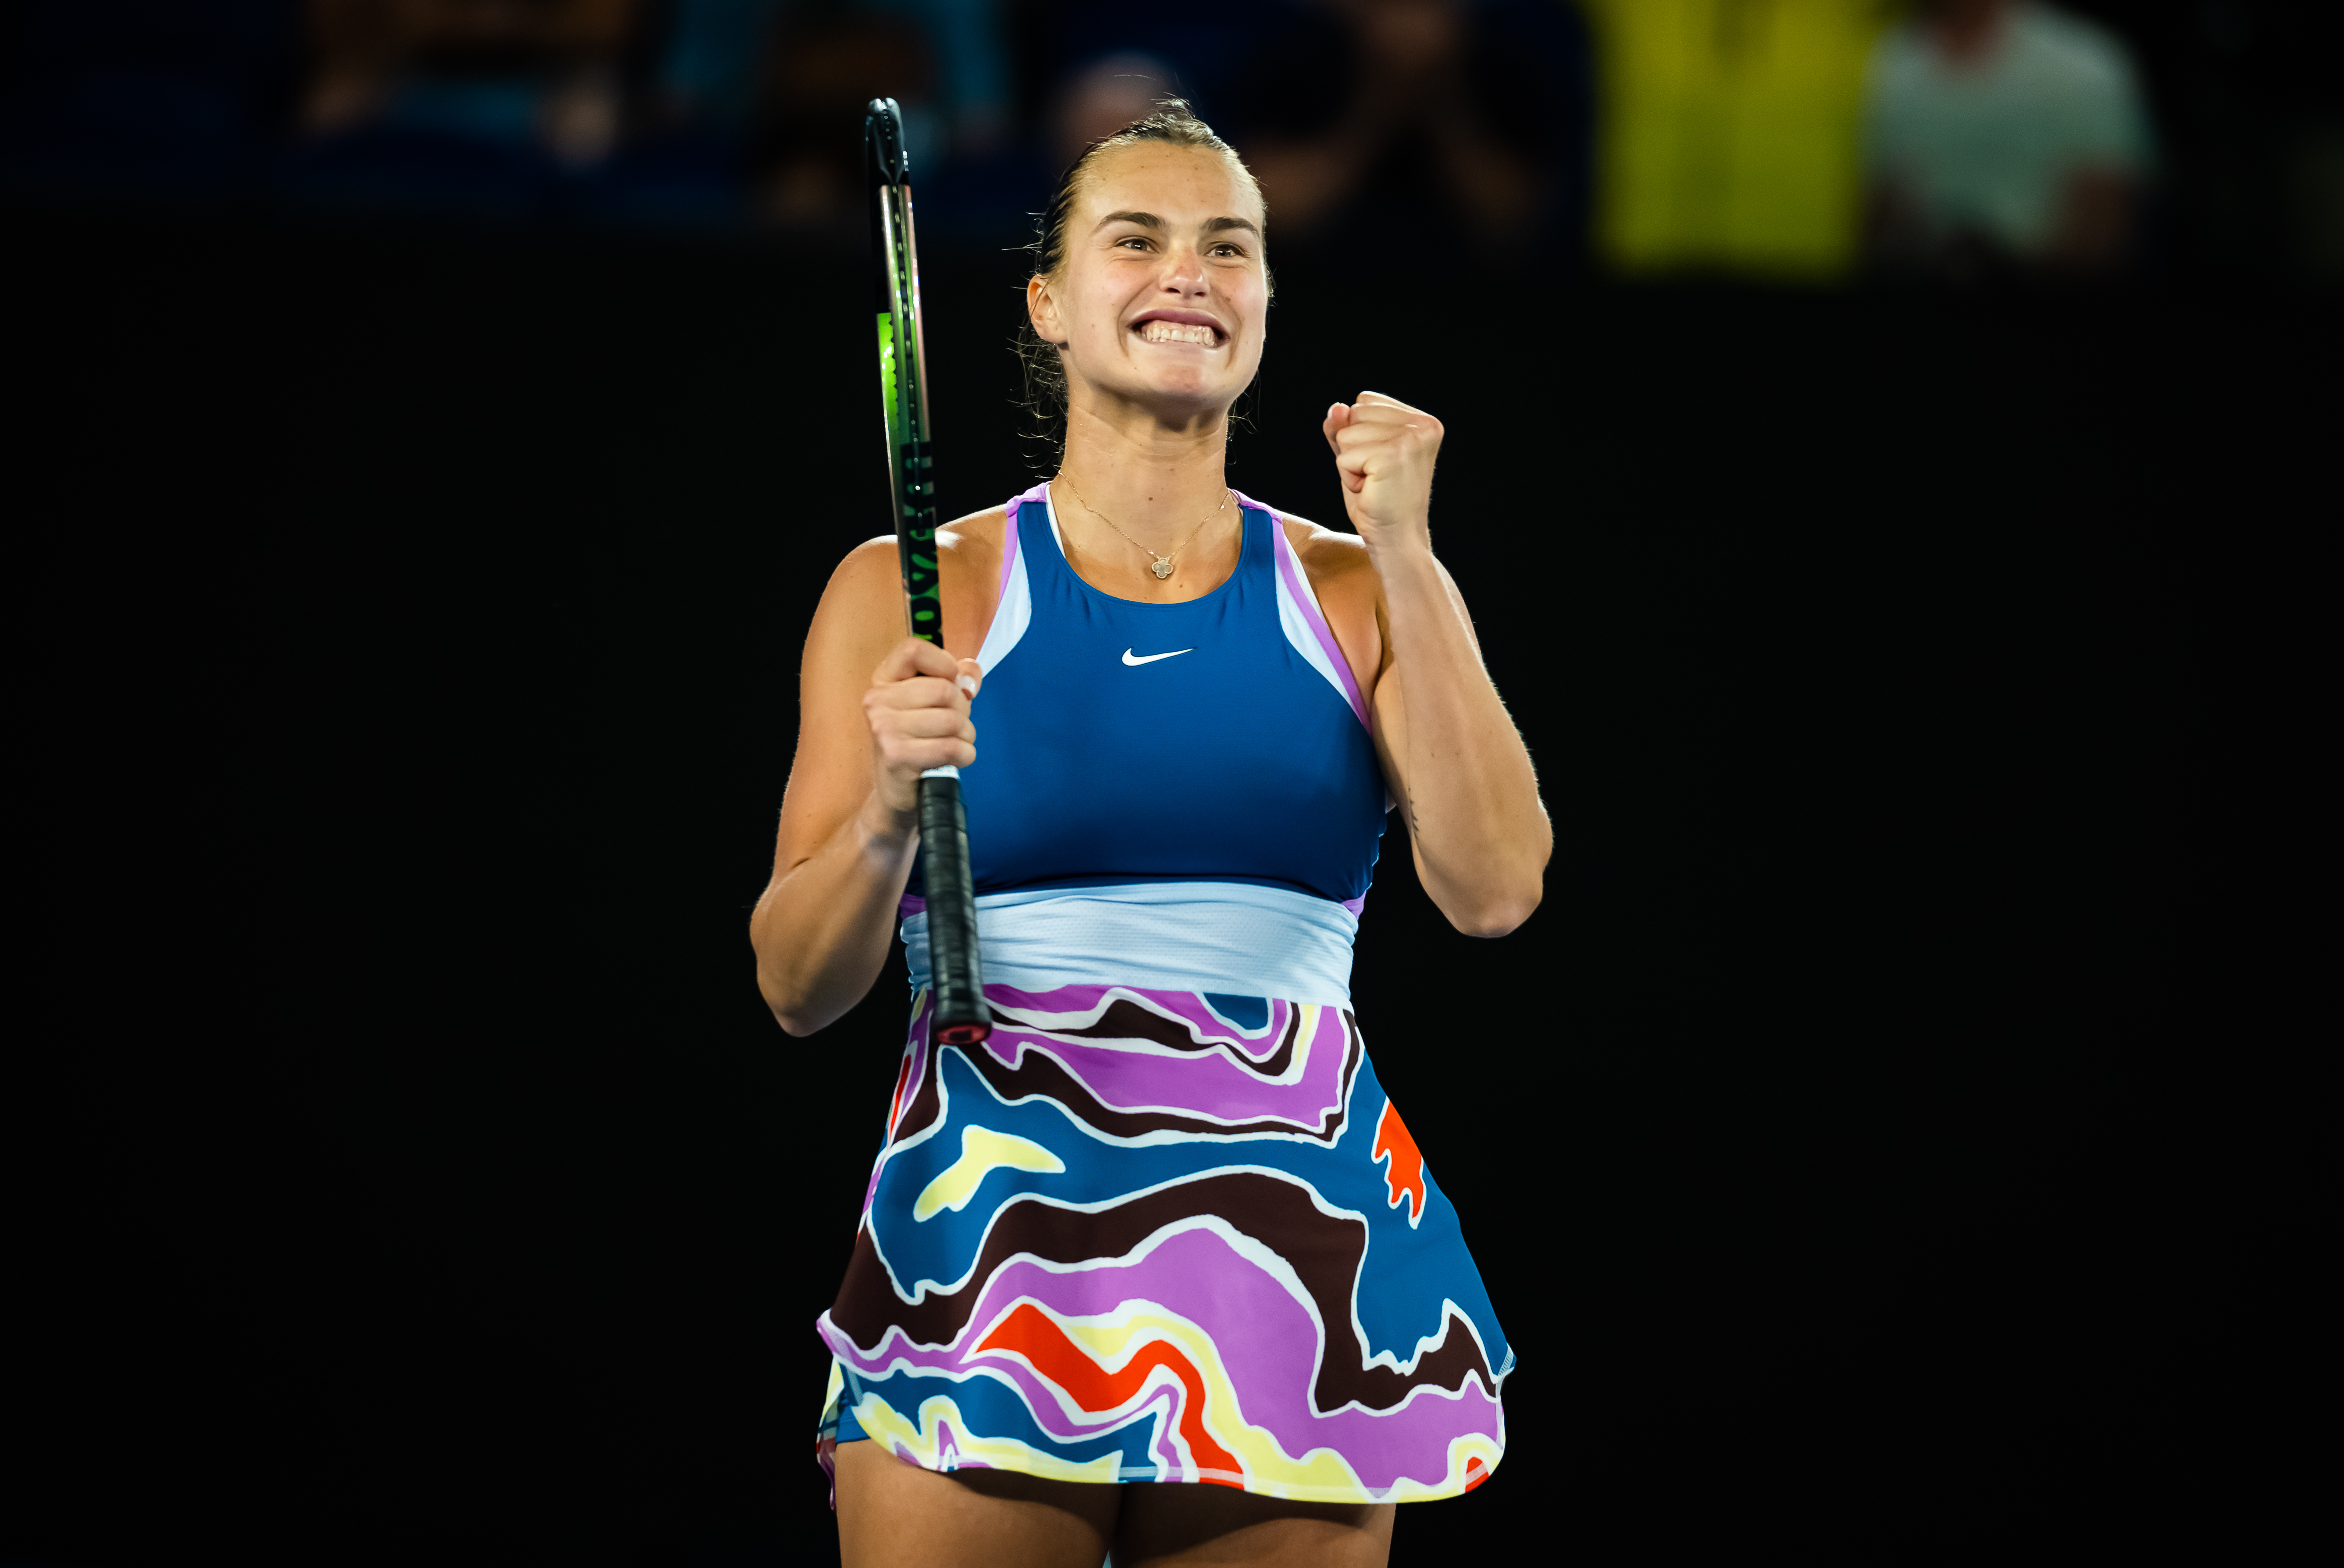 Aryna Sabalenka of Belarus reacts to converting match point against Magda Linette of Poland in her semi-final match on Day 11 of the 2023 Australian Open at Melbourne Park on January 26, 2023 in Melbourne, Australia.